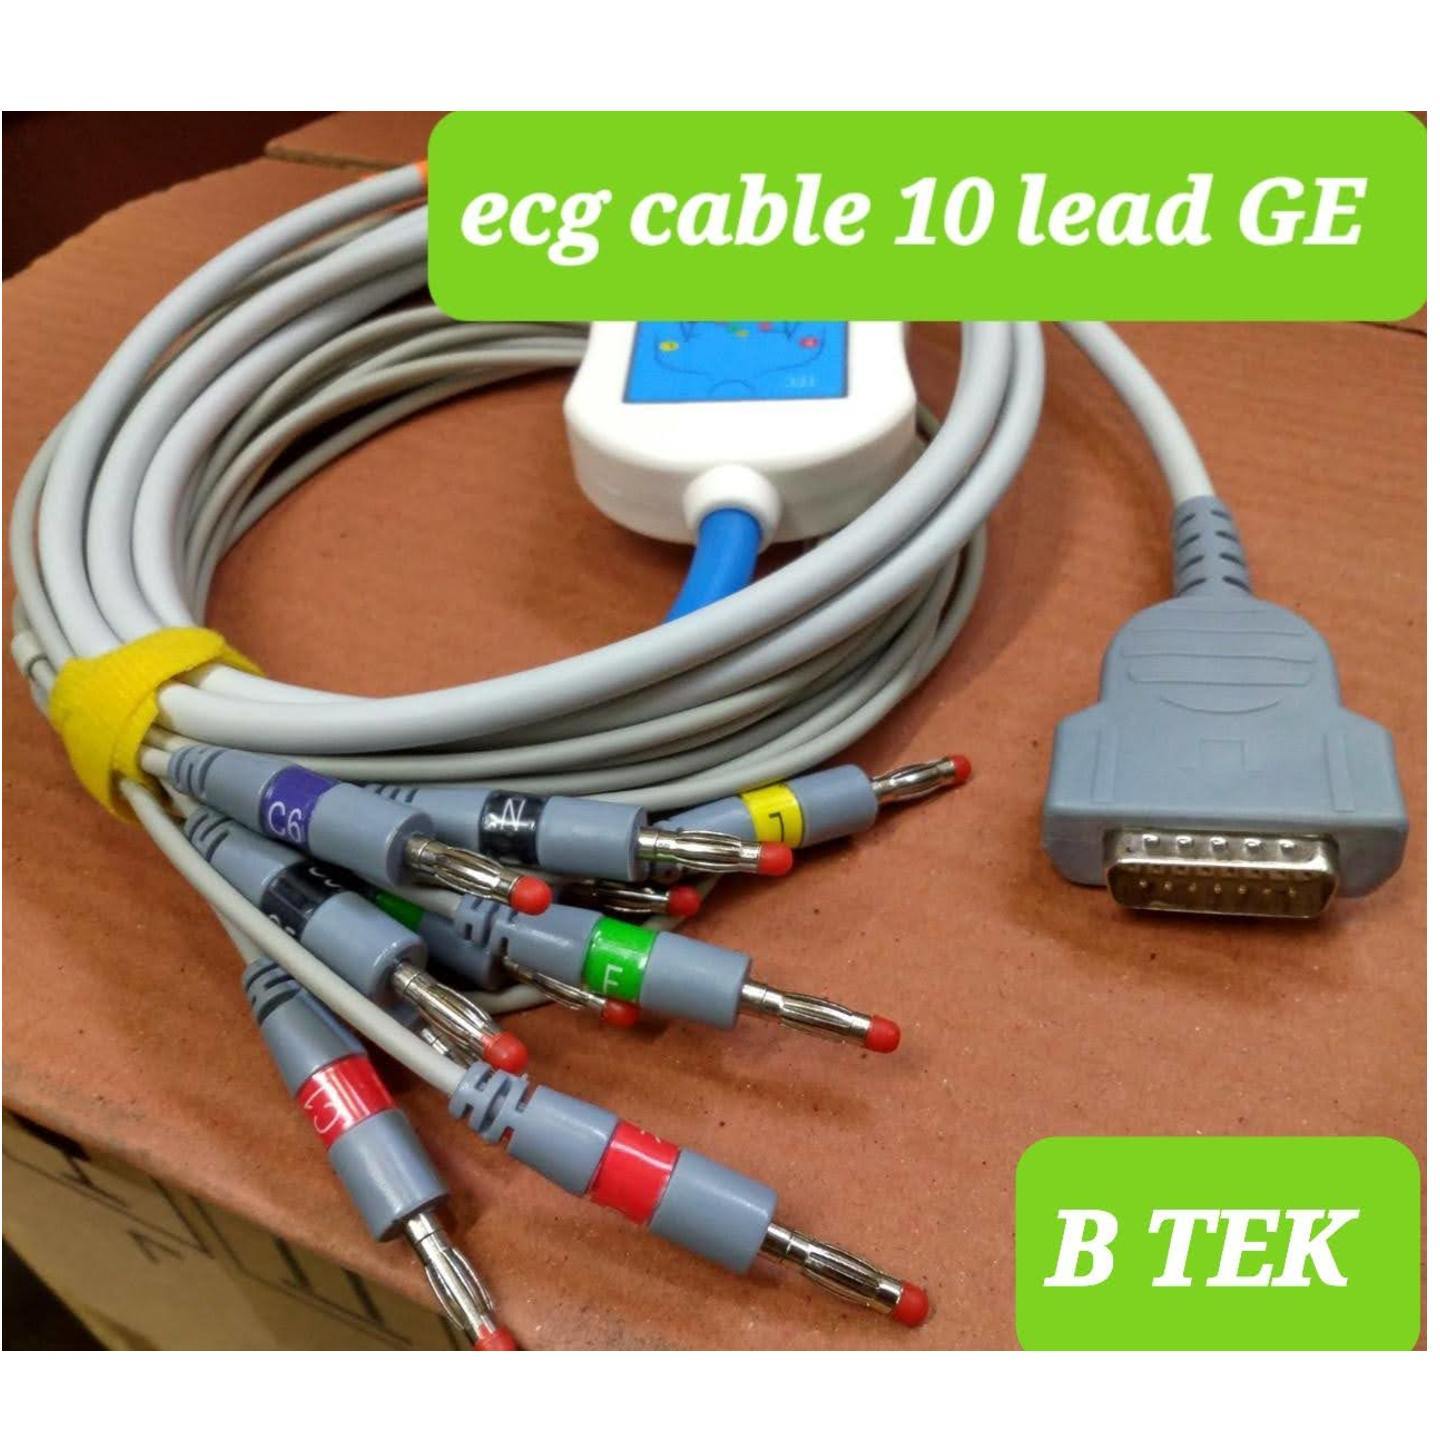 ECG CABLE EKG CABLE FOR GE MAC